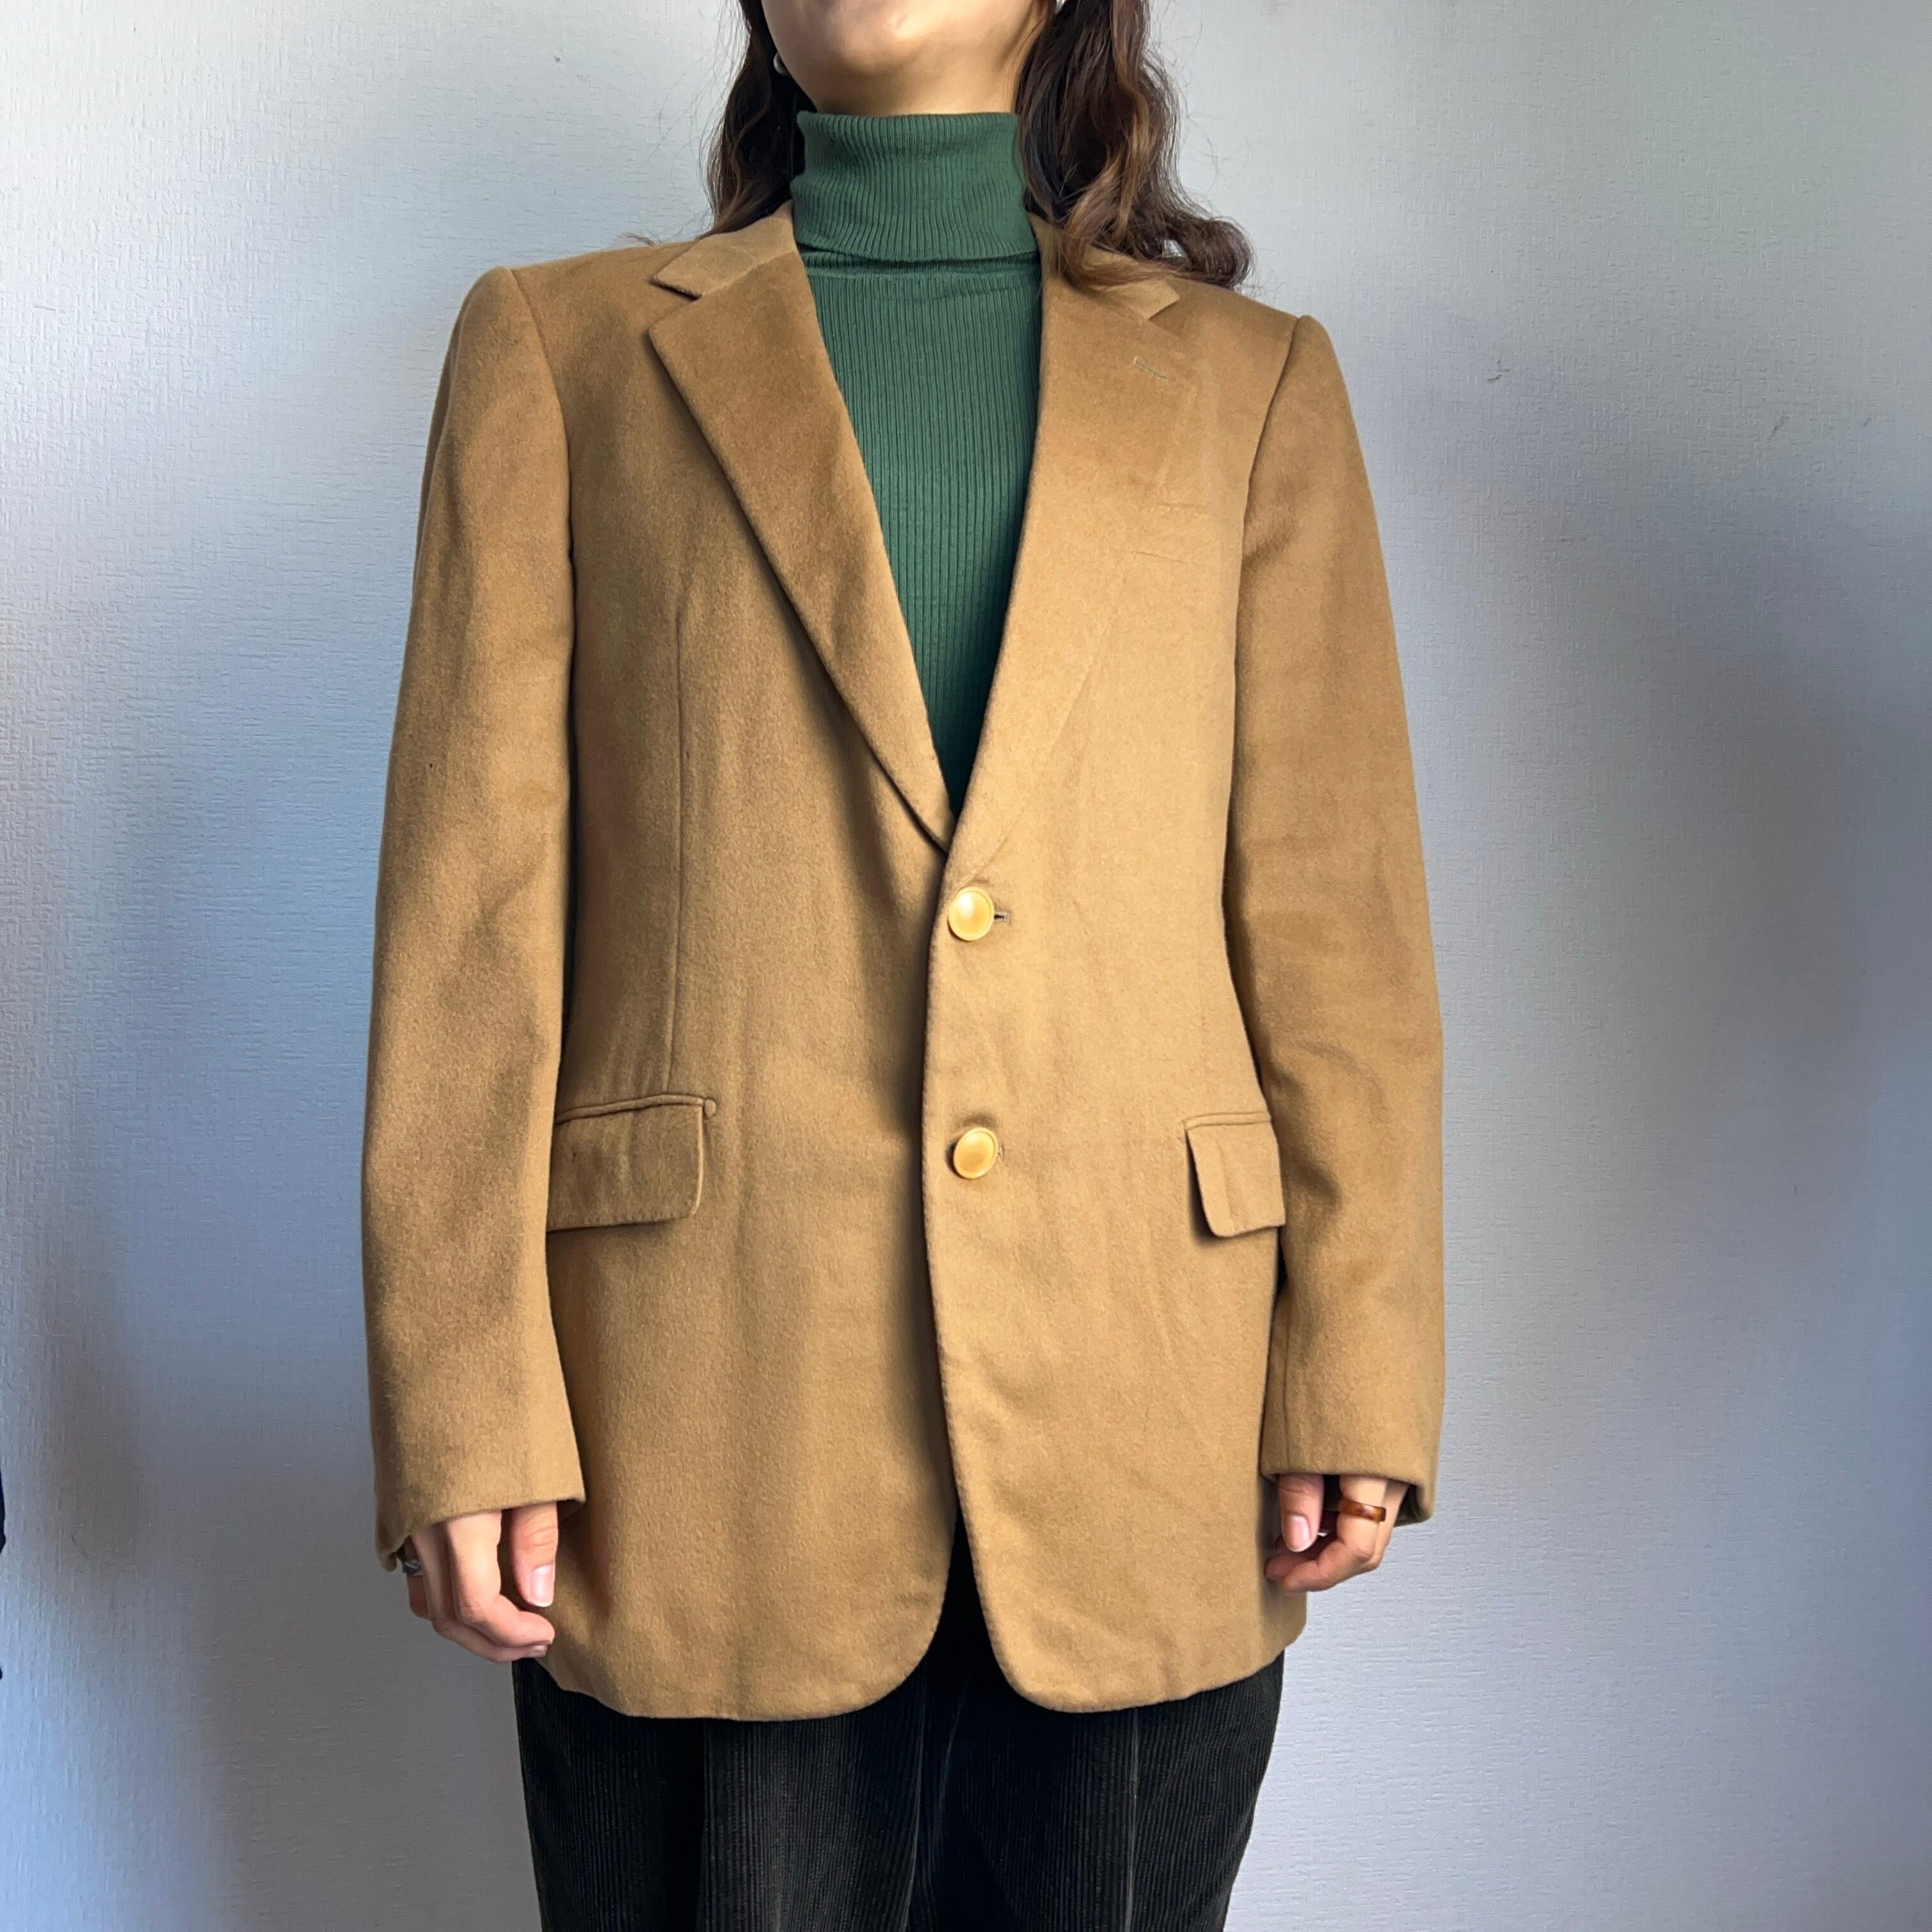 Vintage “HERMES” Cashmere Tailored Jacket ITALY製 エルメス